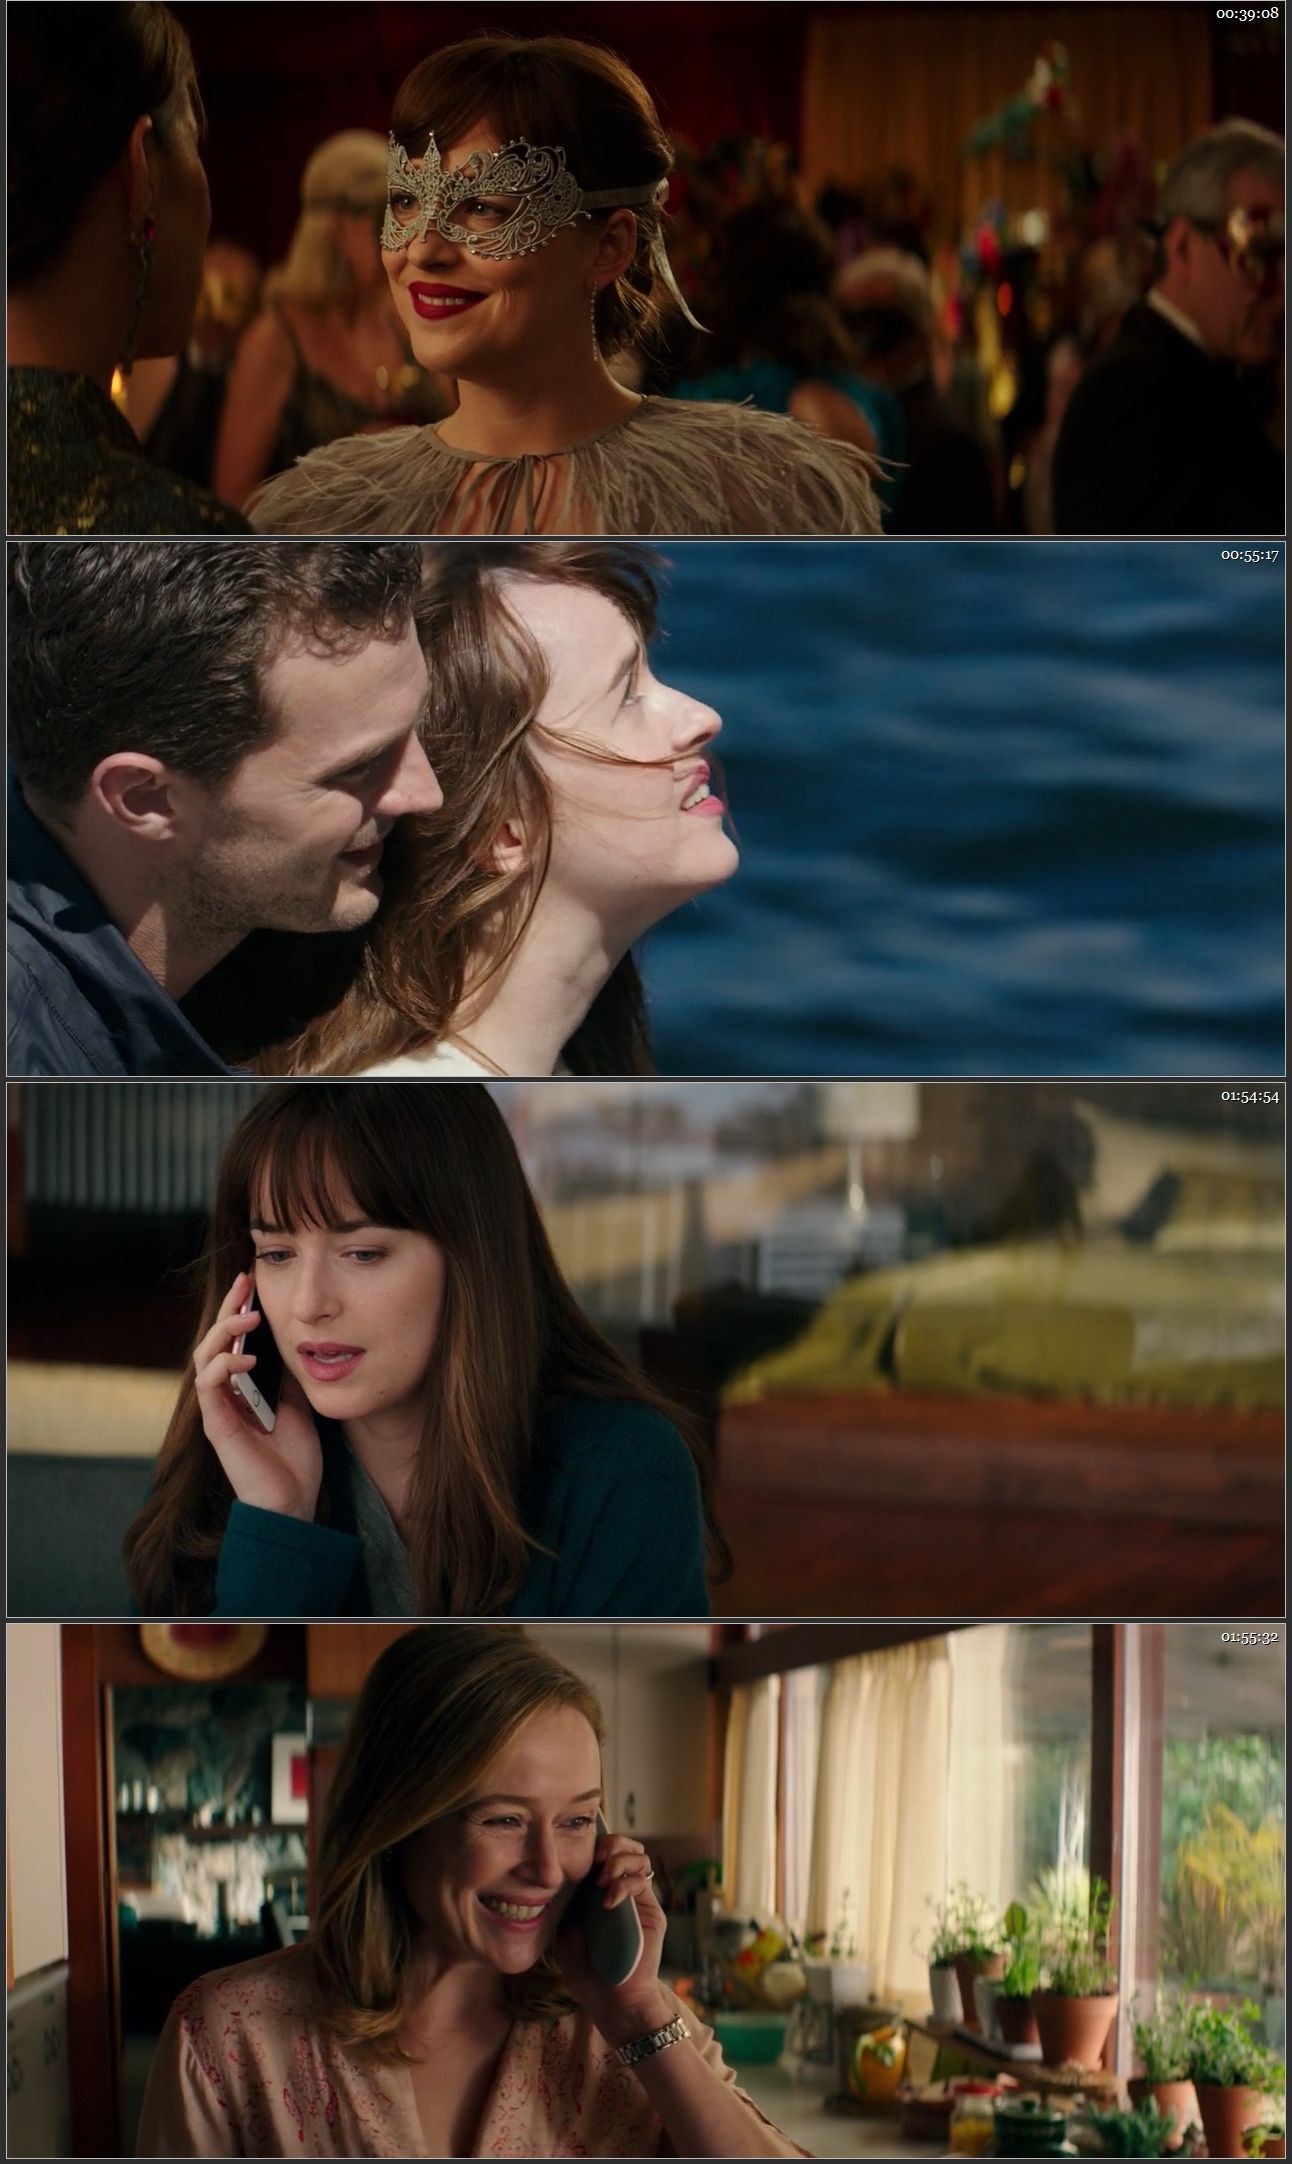 Fifty shades of grey dual audio 720p torrent